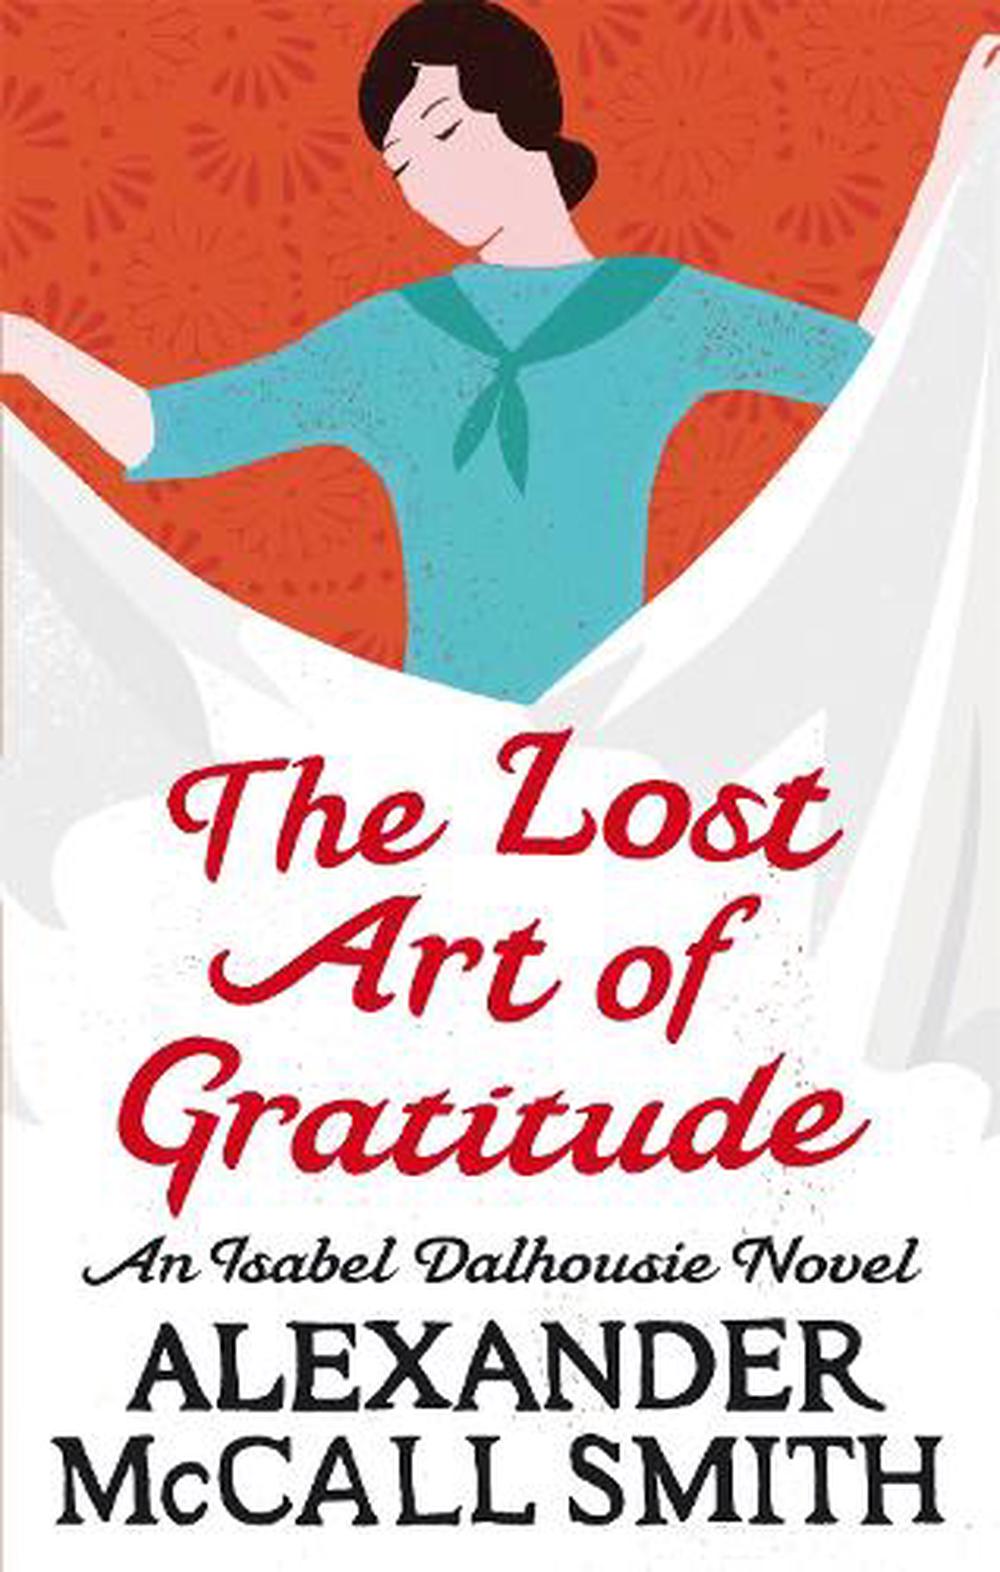 the lost art of gratitude by alexander mccall smith